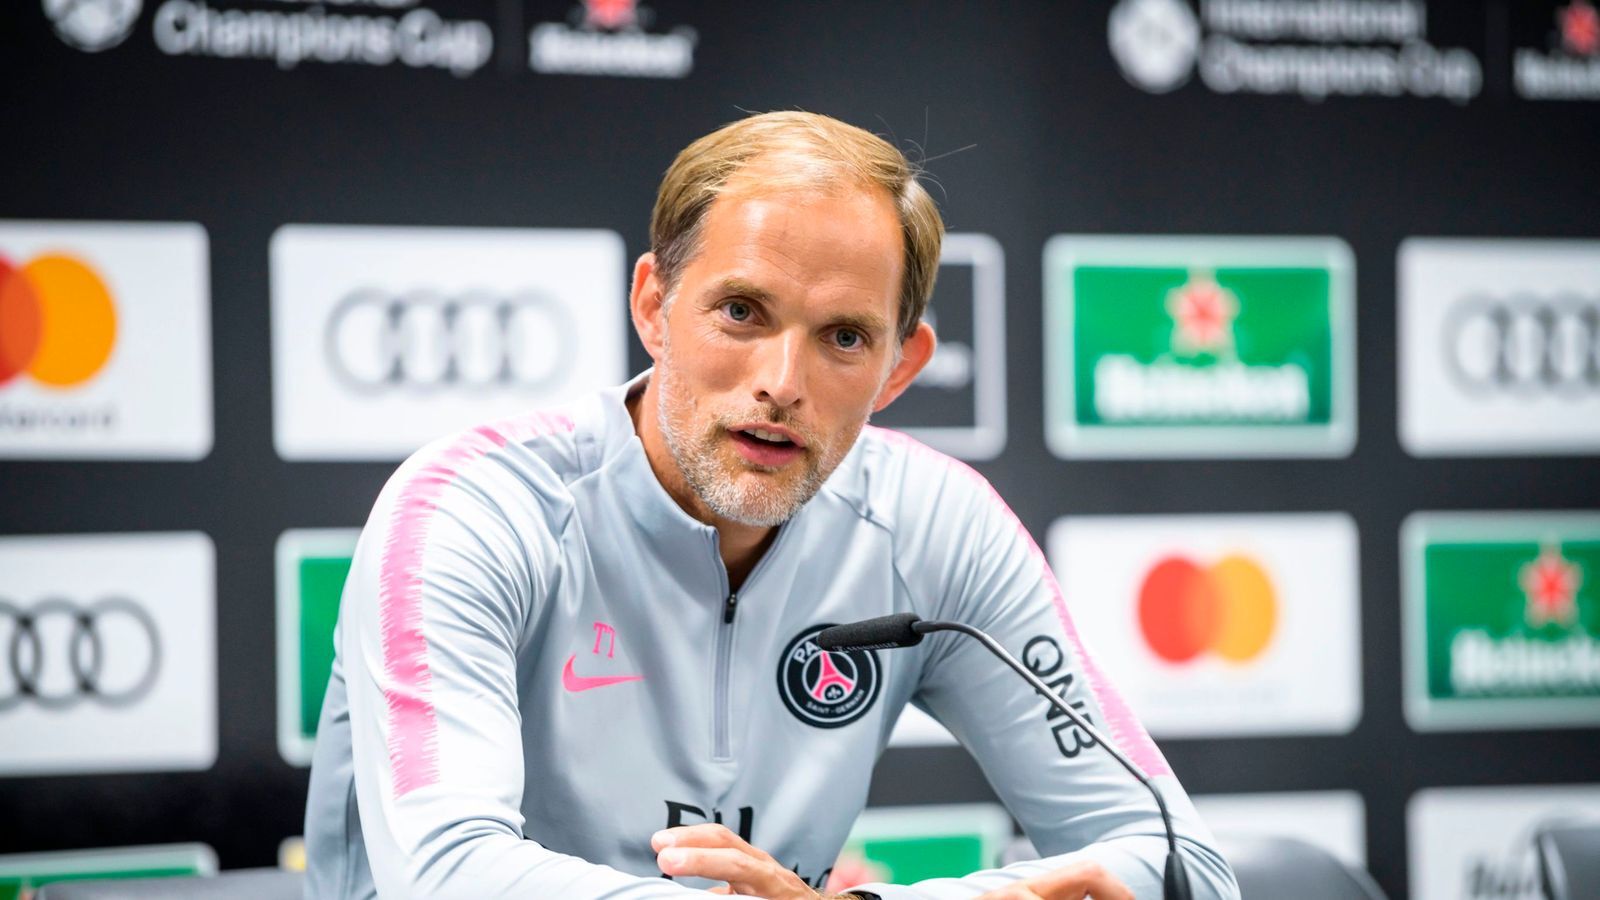 PSG Sporting Director Leonardo Confirms That Tuchel Will Stay as Their Manager